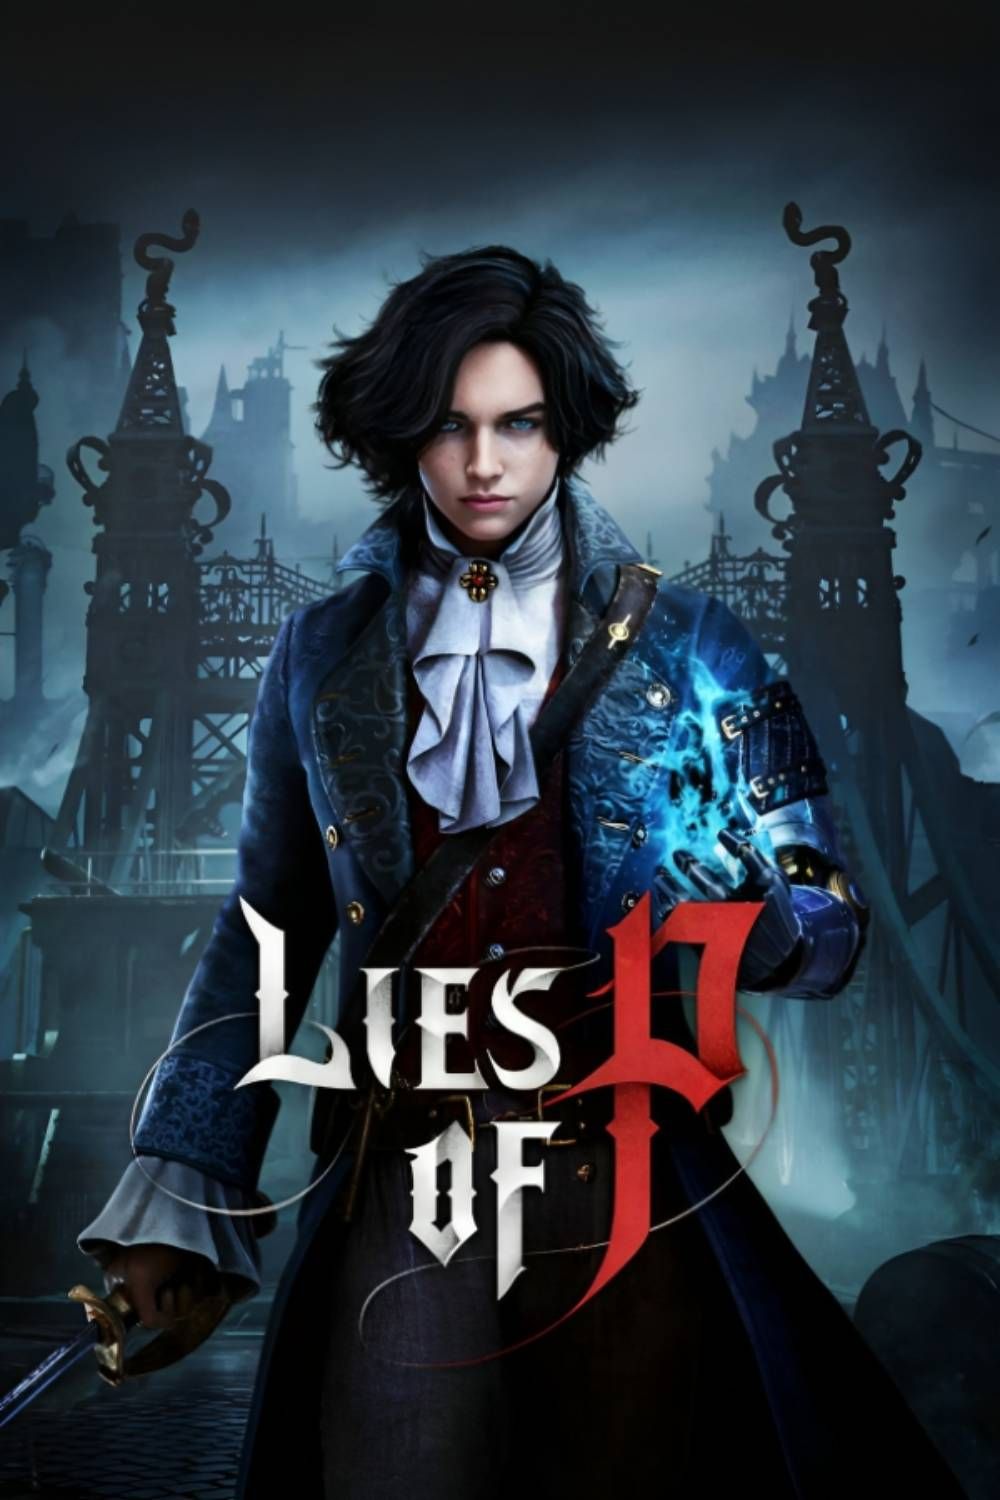 Lies of P launch guide: Release date, trailer, preorder, file size, and more